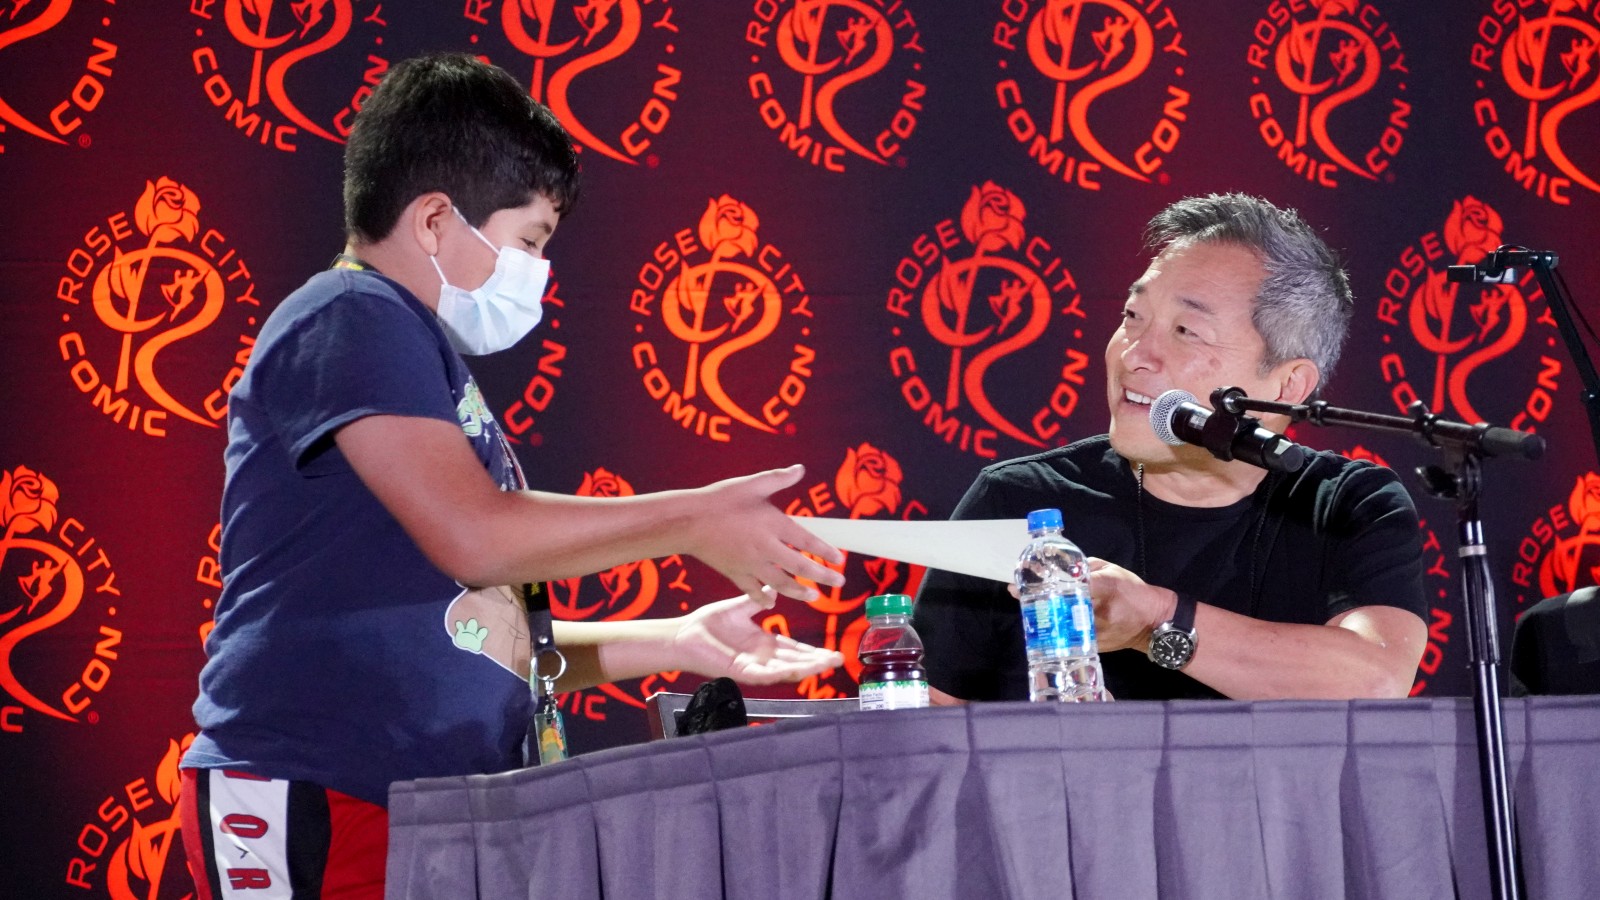 Jim Lee gives a fan a hand made original drawing at a comic con event.